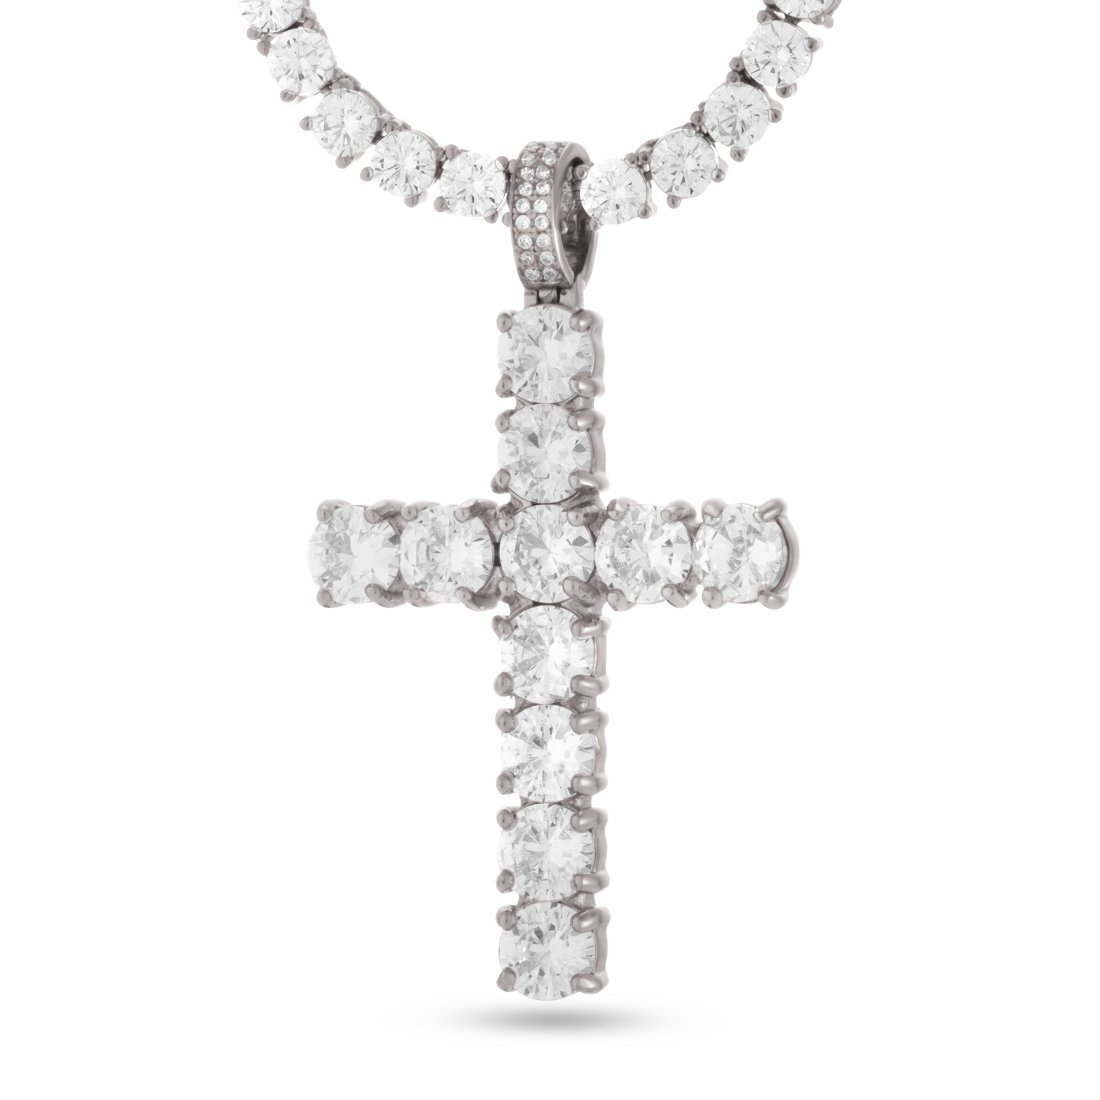 White Gold / M Tennis Cross Necklace NKX12339-Silver